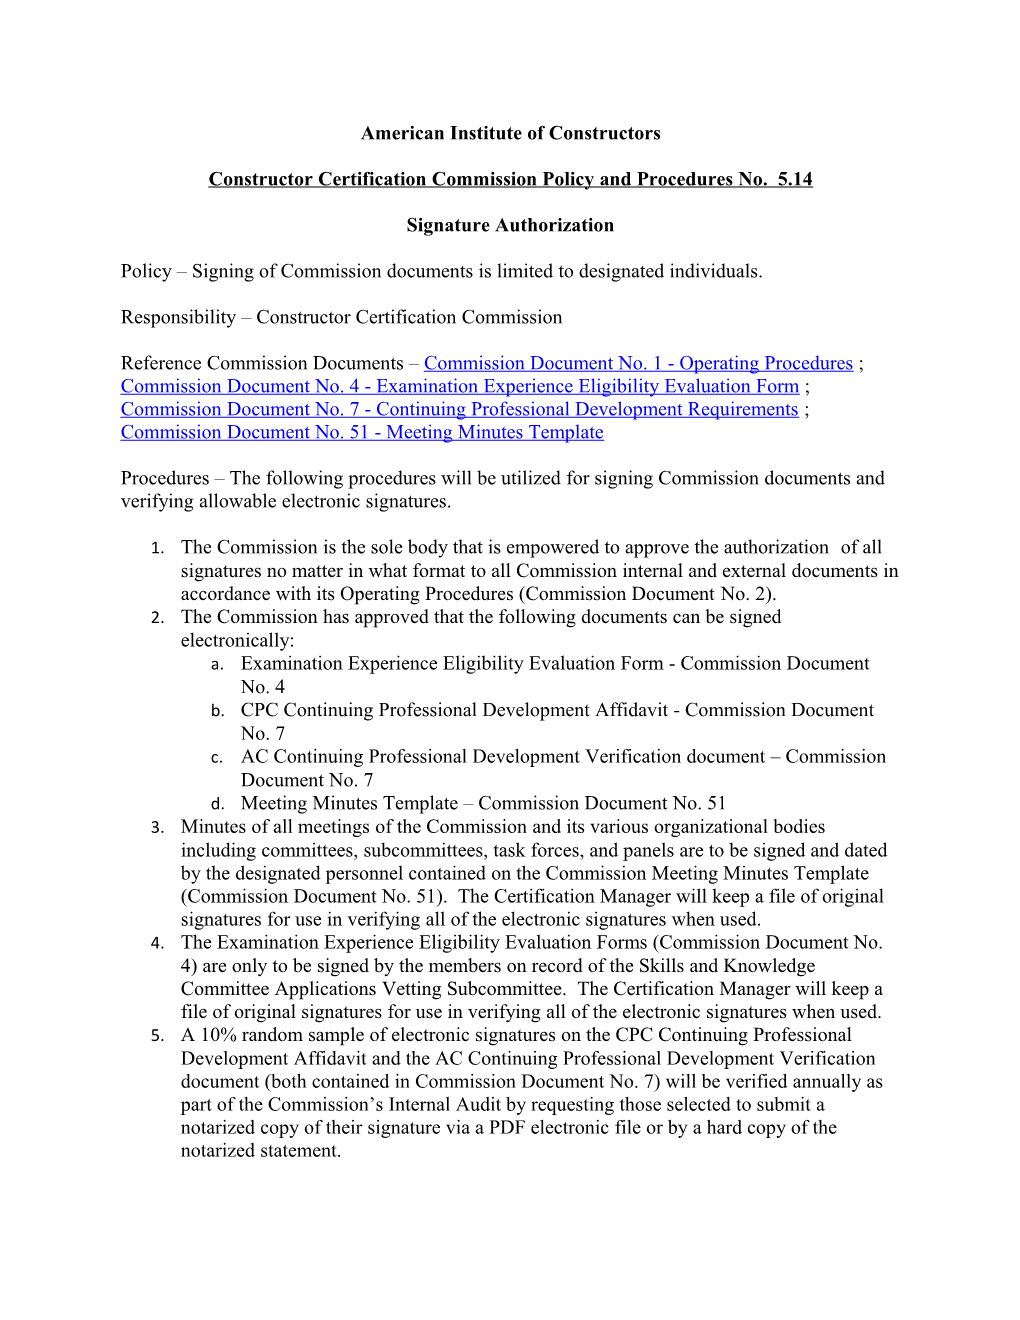 Constructor Certification Commission Policy and Procedures No. 5.14